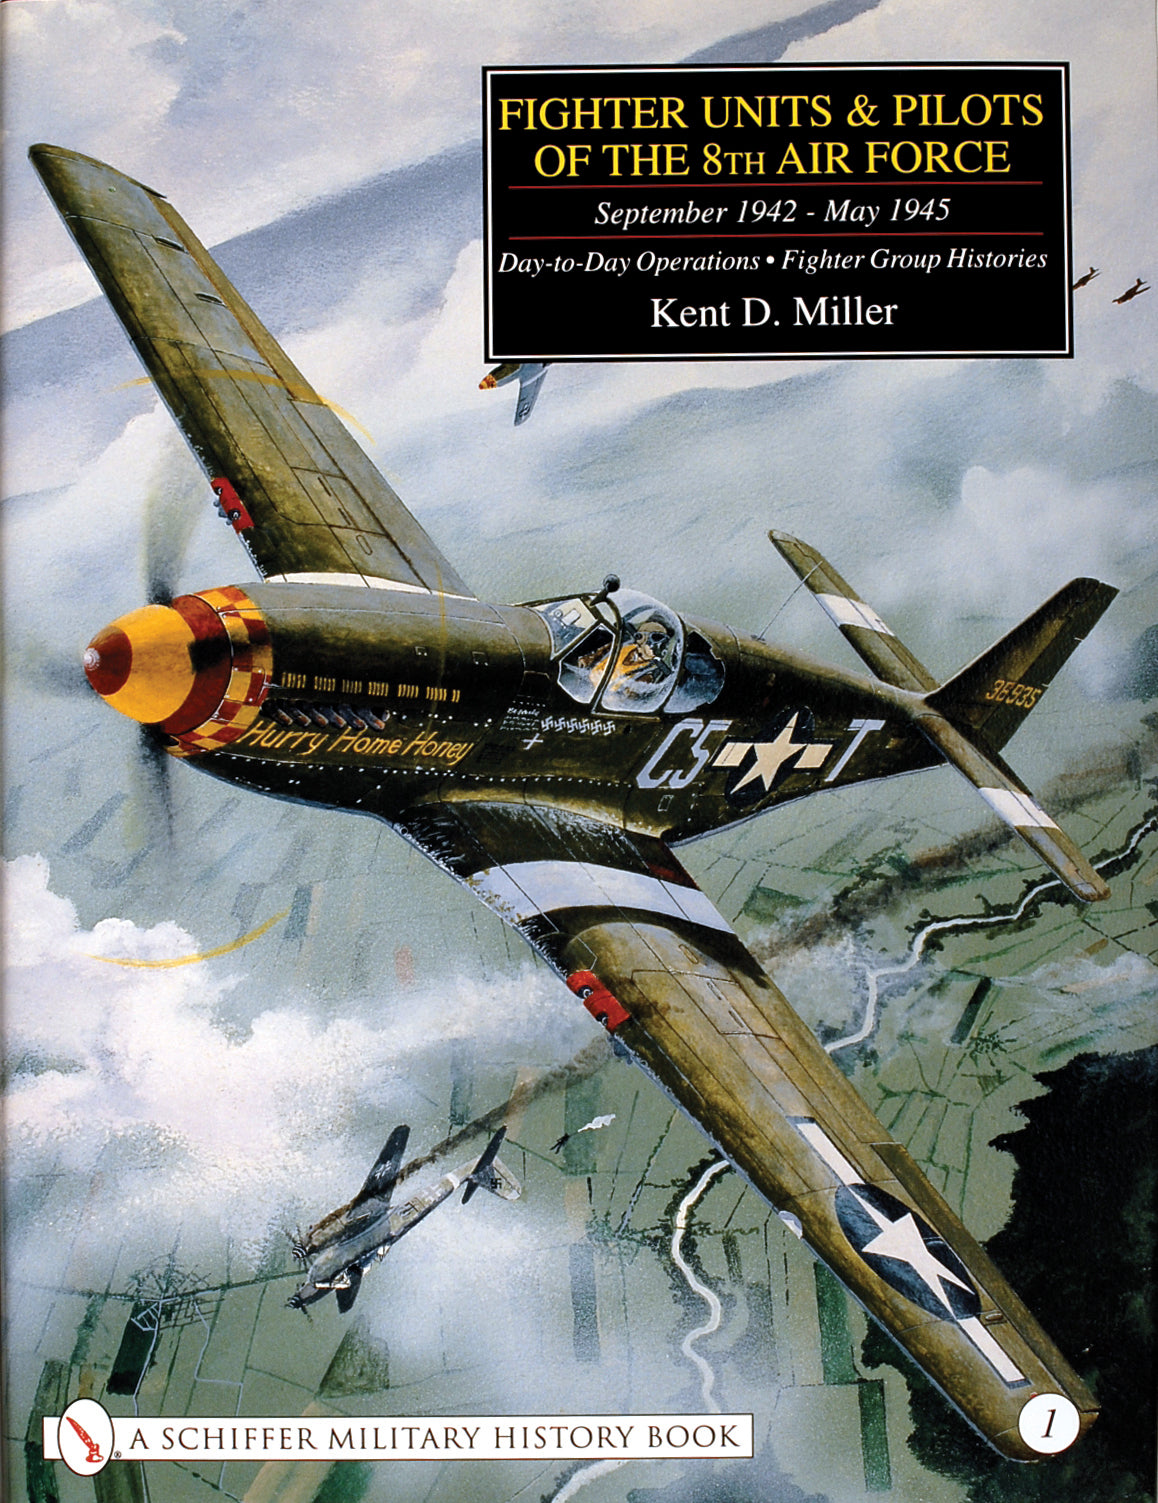 Fighter Units & Pilots of the 8th Air Force September 1942 - May 1945 Vol. 1